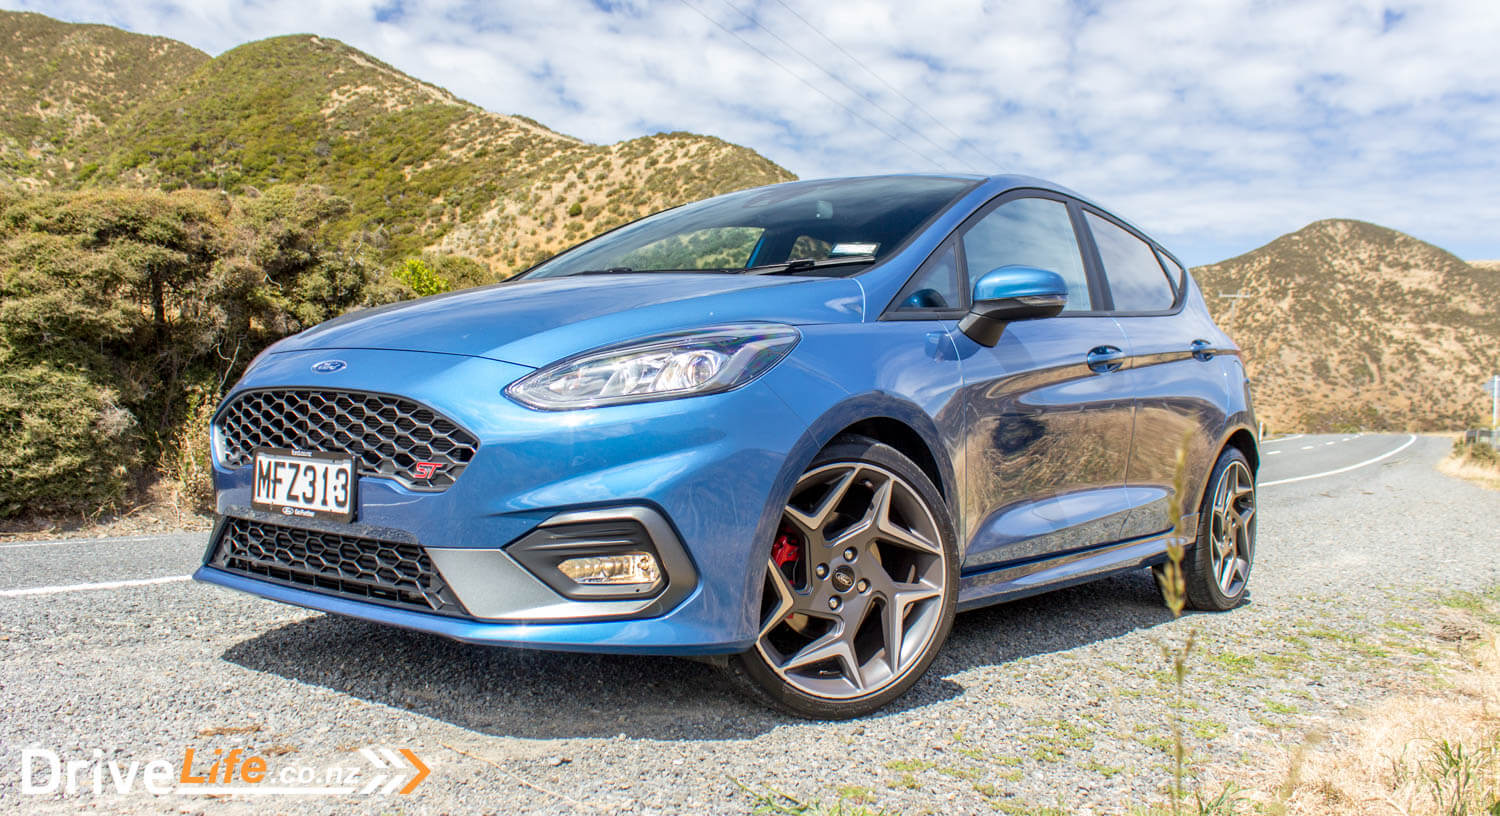 New 2019 Ford Fiesta ST Driven: It's Absolutely Brilliant